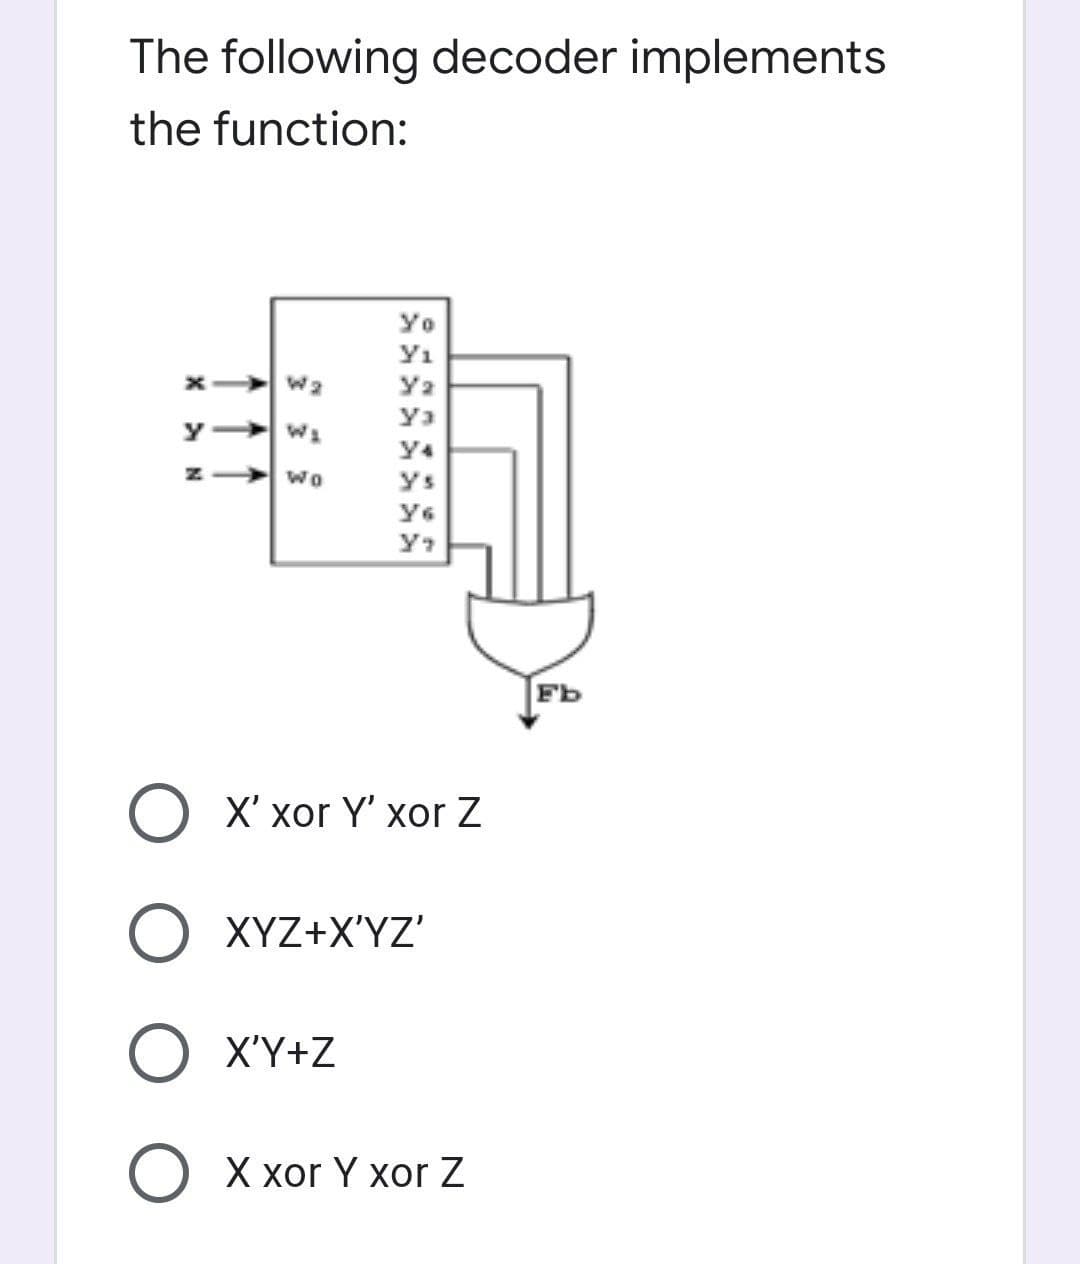 The following decoder implements
the function:
Yo
Y1
wa
Y4
z > wo
ys
Fb
X хor Y хоr Z
XYZ+X'YZ'
O X'Y+Z
X xor Y xor Z
